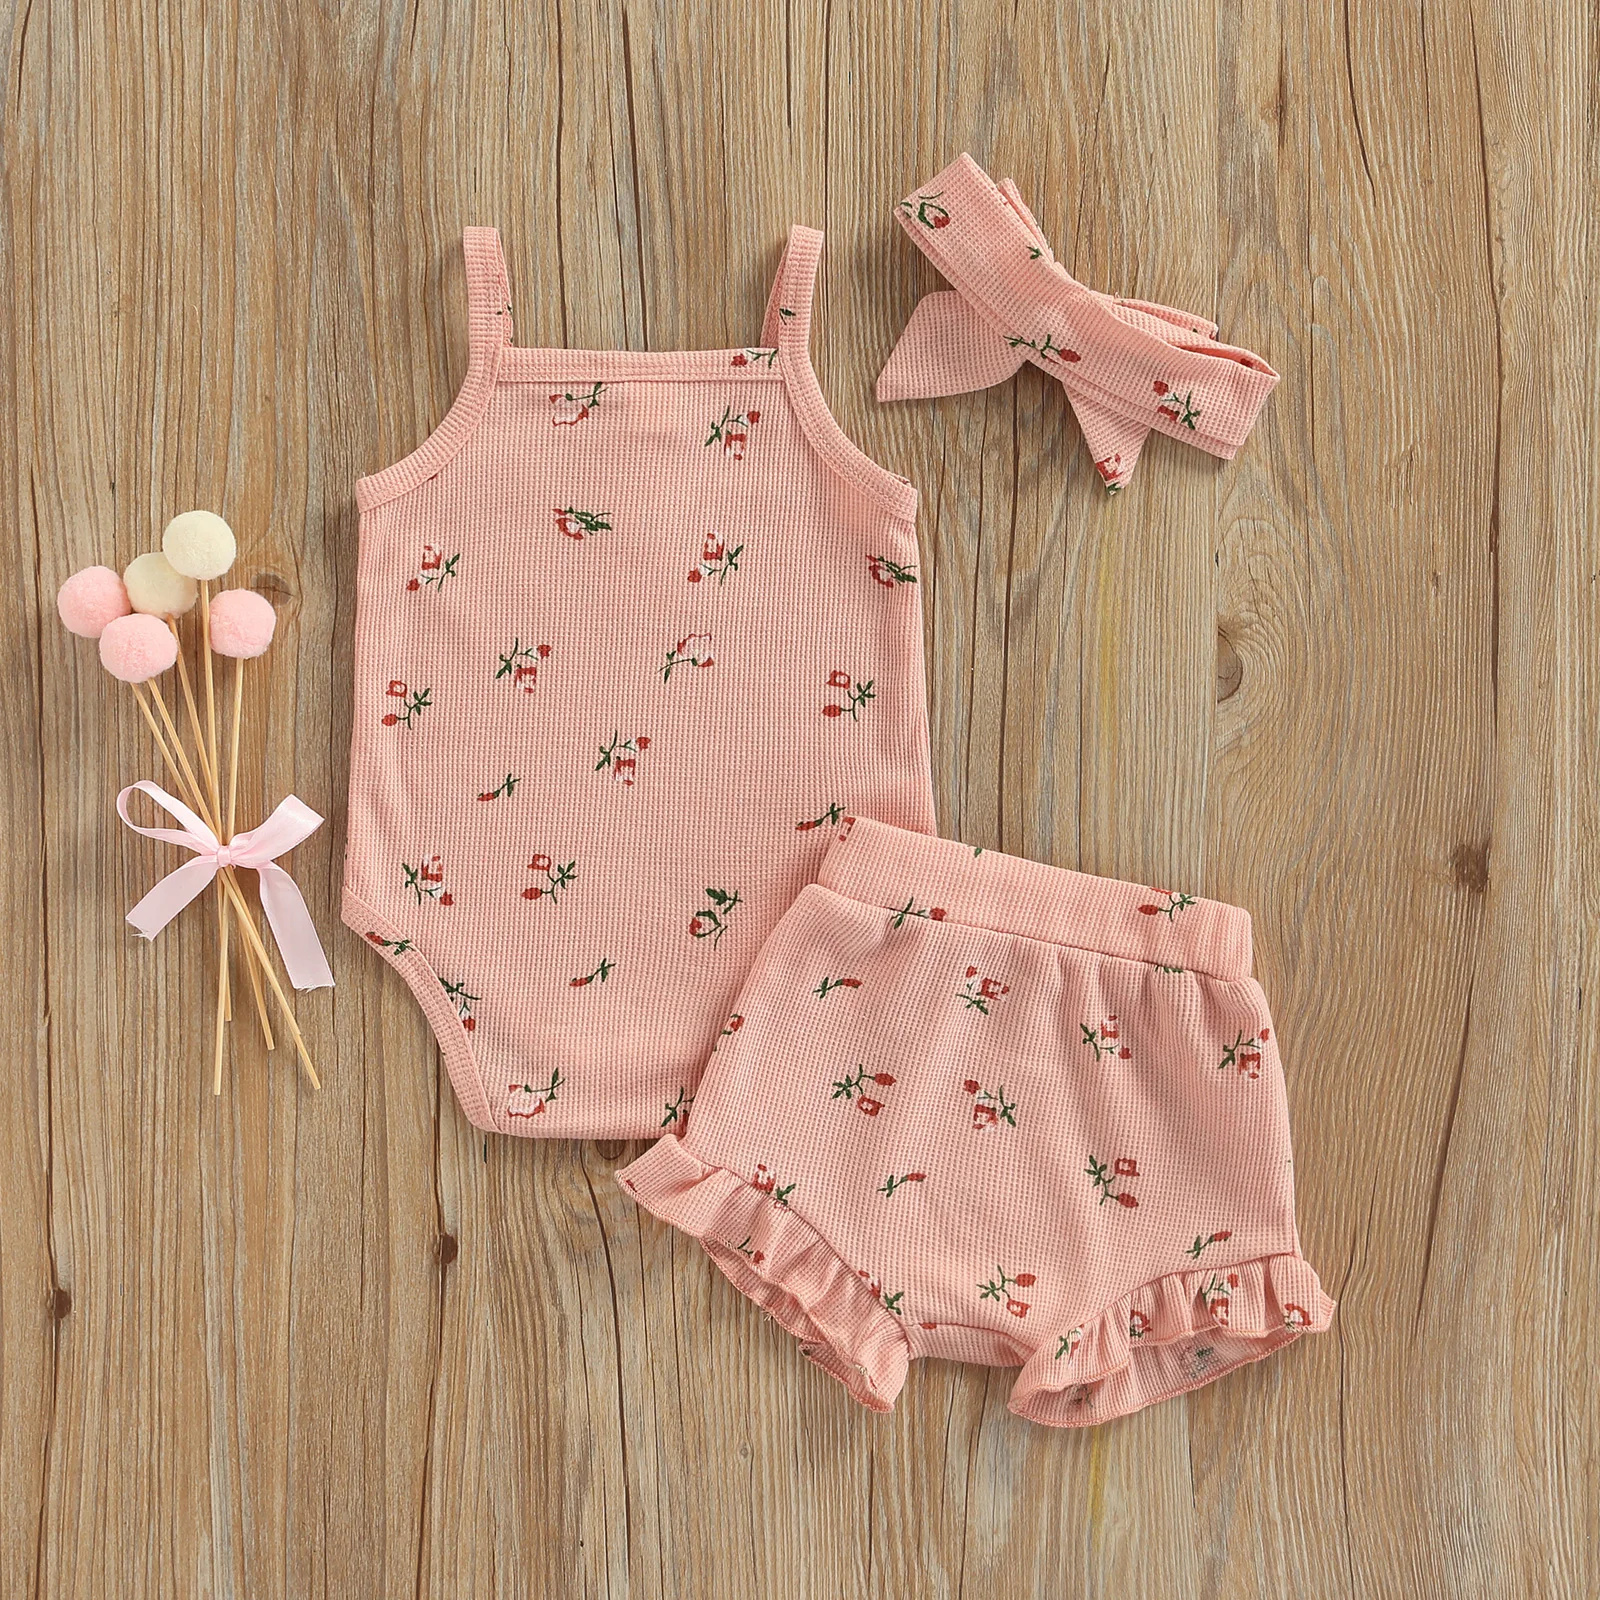 Infant Baby Girl’s Tops and Shorts Set Fashion Floral Suspender Romper and Short Pants with Headband baby clothes mini set